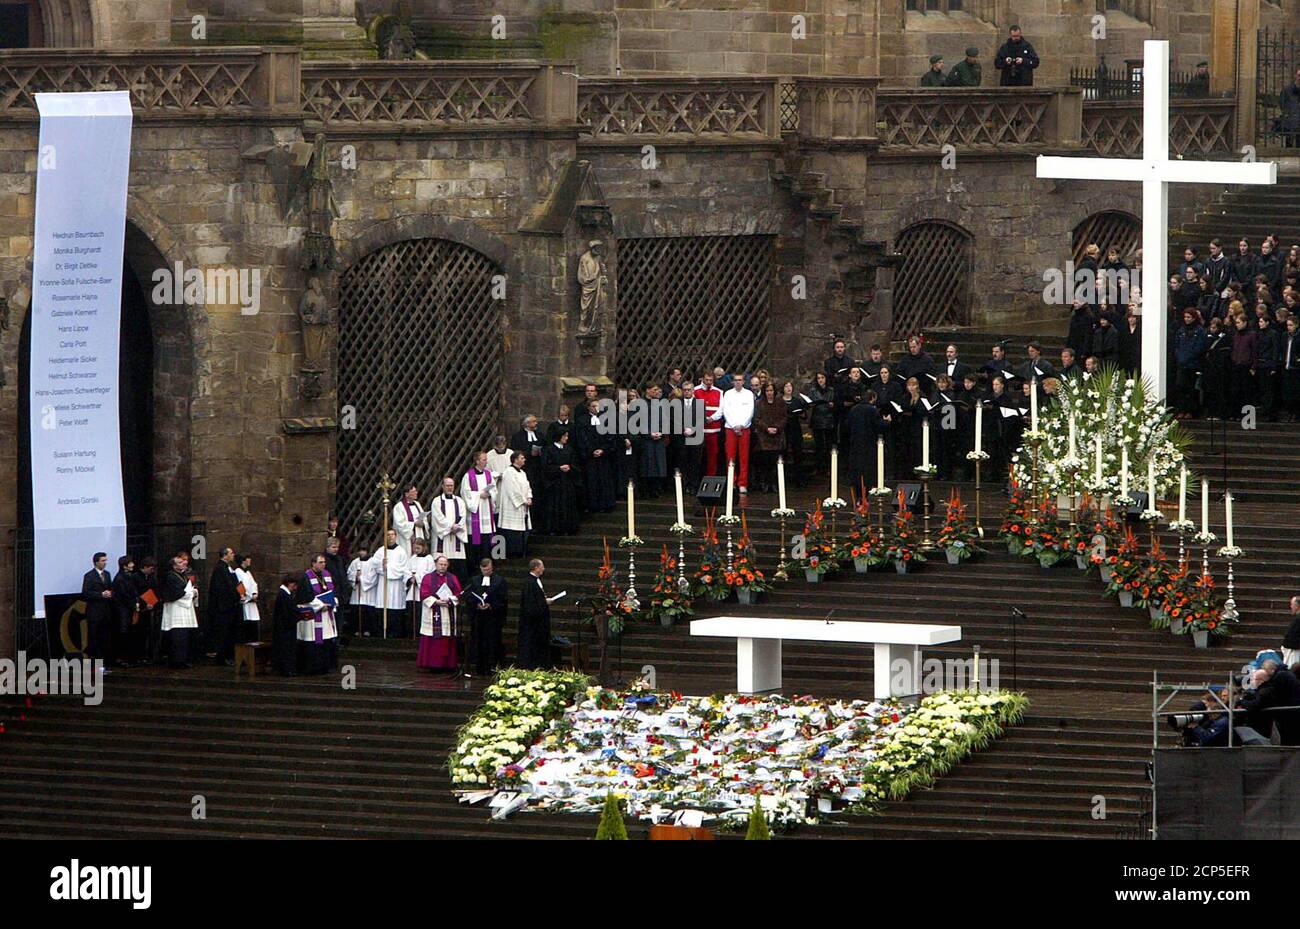 Sixteen candles, flowers and a white cross are placed on the steps of Erfurt cathedral during an official memorial May 3, 2002 for the 16 victims of a shooting at the Gutenberg secondary school one week ago. Robert Steinhaeuser, an expelled 19-year-old student shot and killed 16 people at his former school before turning a gun on himself on April 26. Tens of thousands of people attend the memorial service. REUTERS/Kai Pfaffenbach  KP/WS Stock Photo